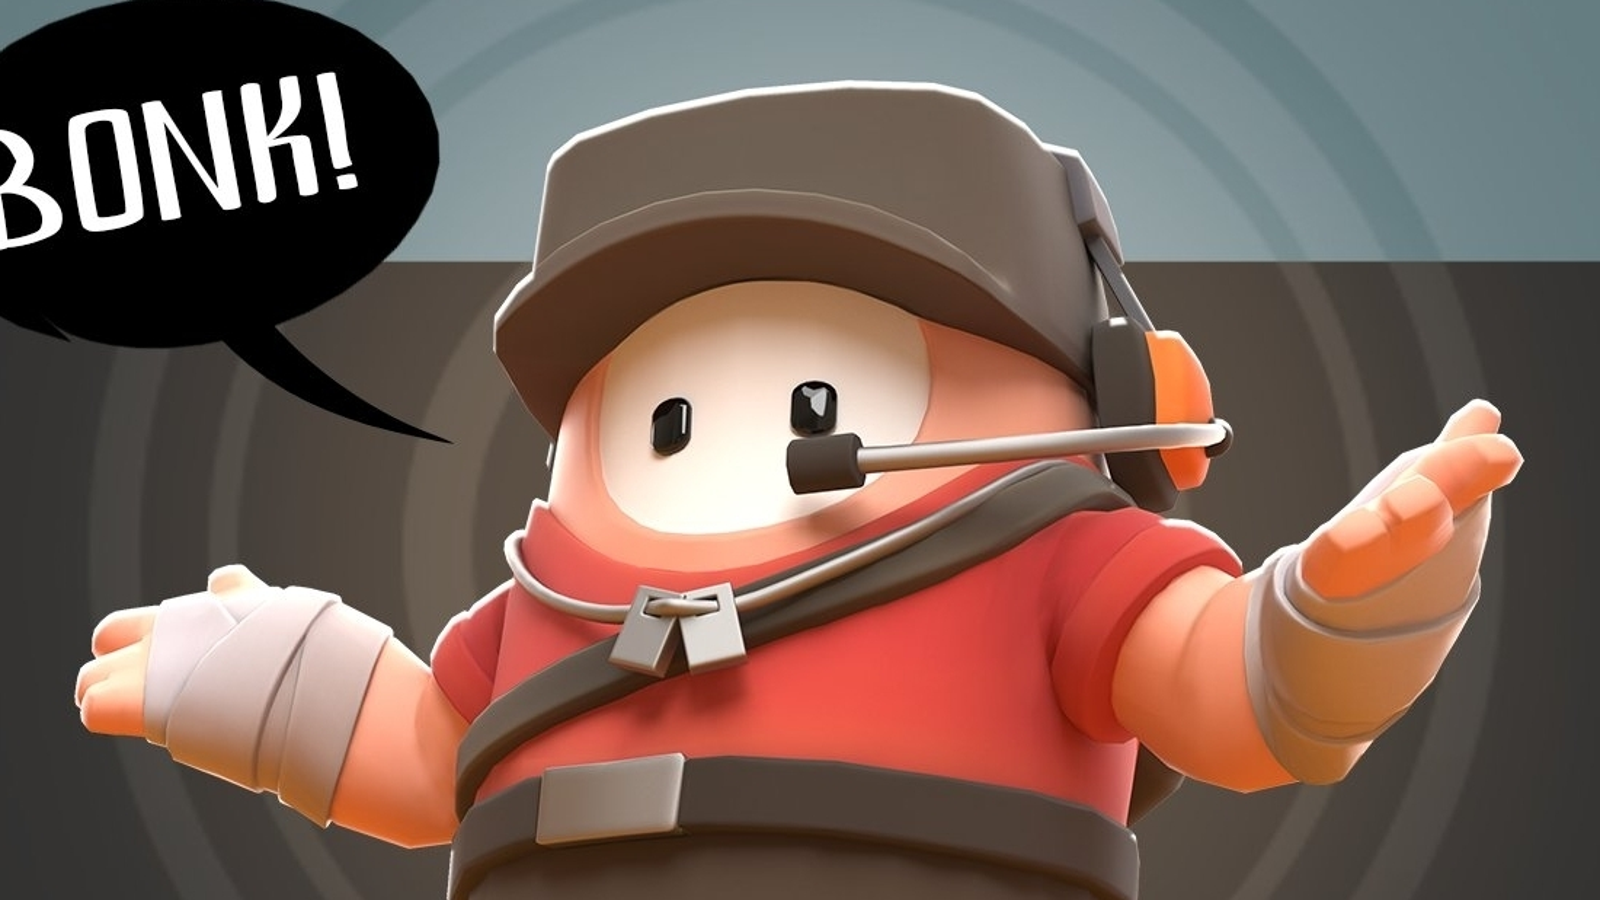 Fall Guys Steam: is the game still available on the platform?